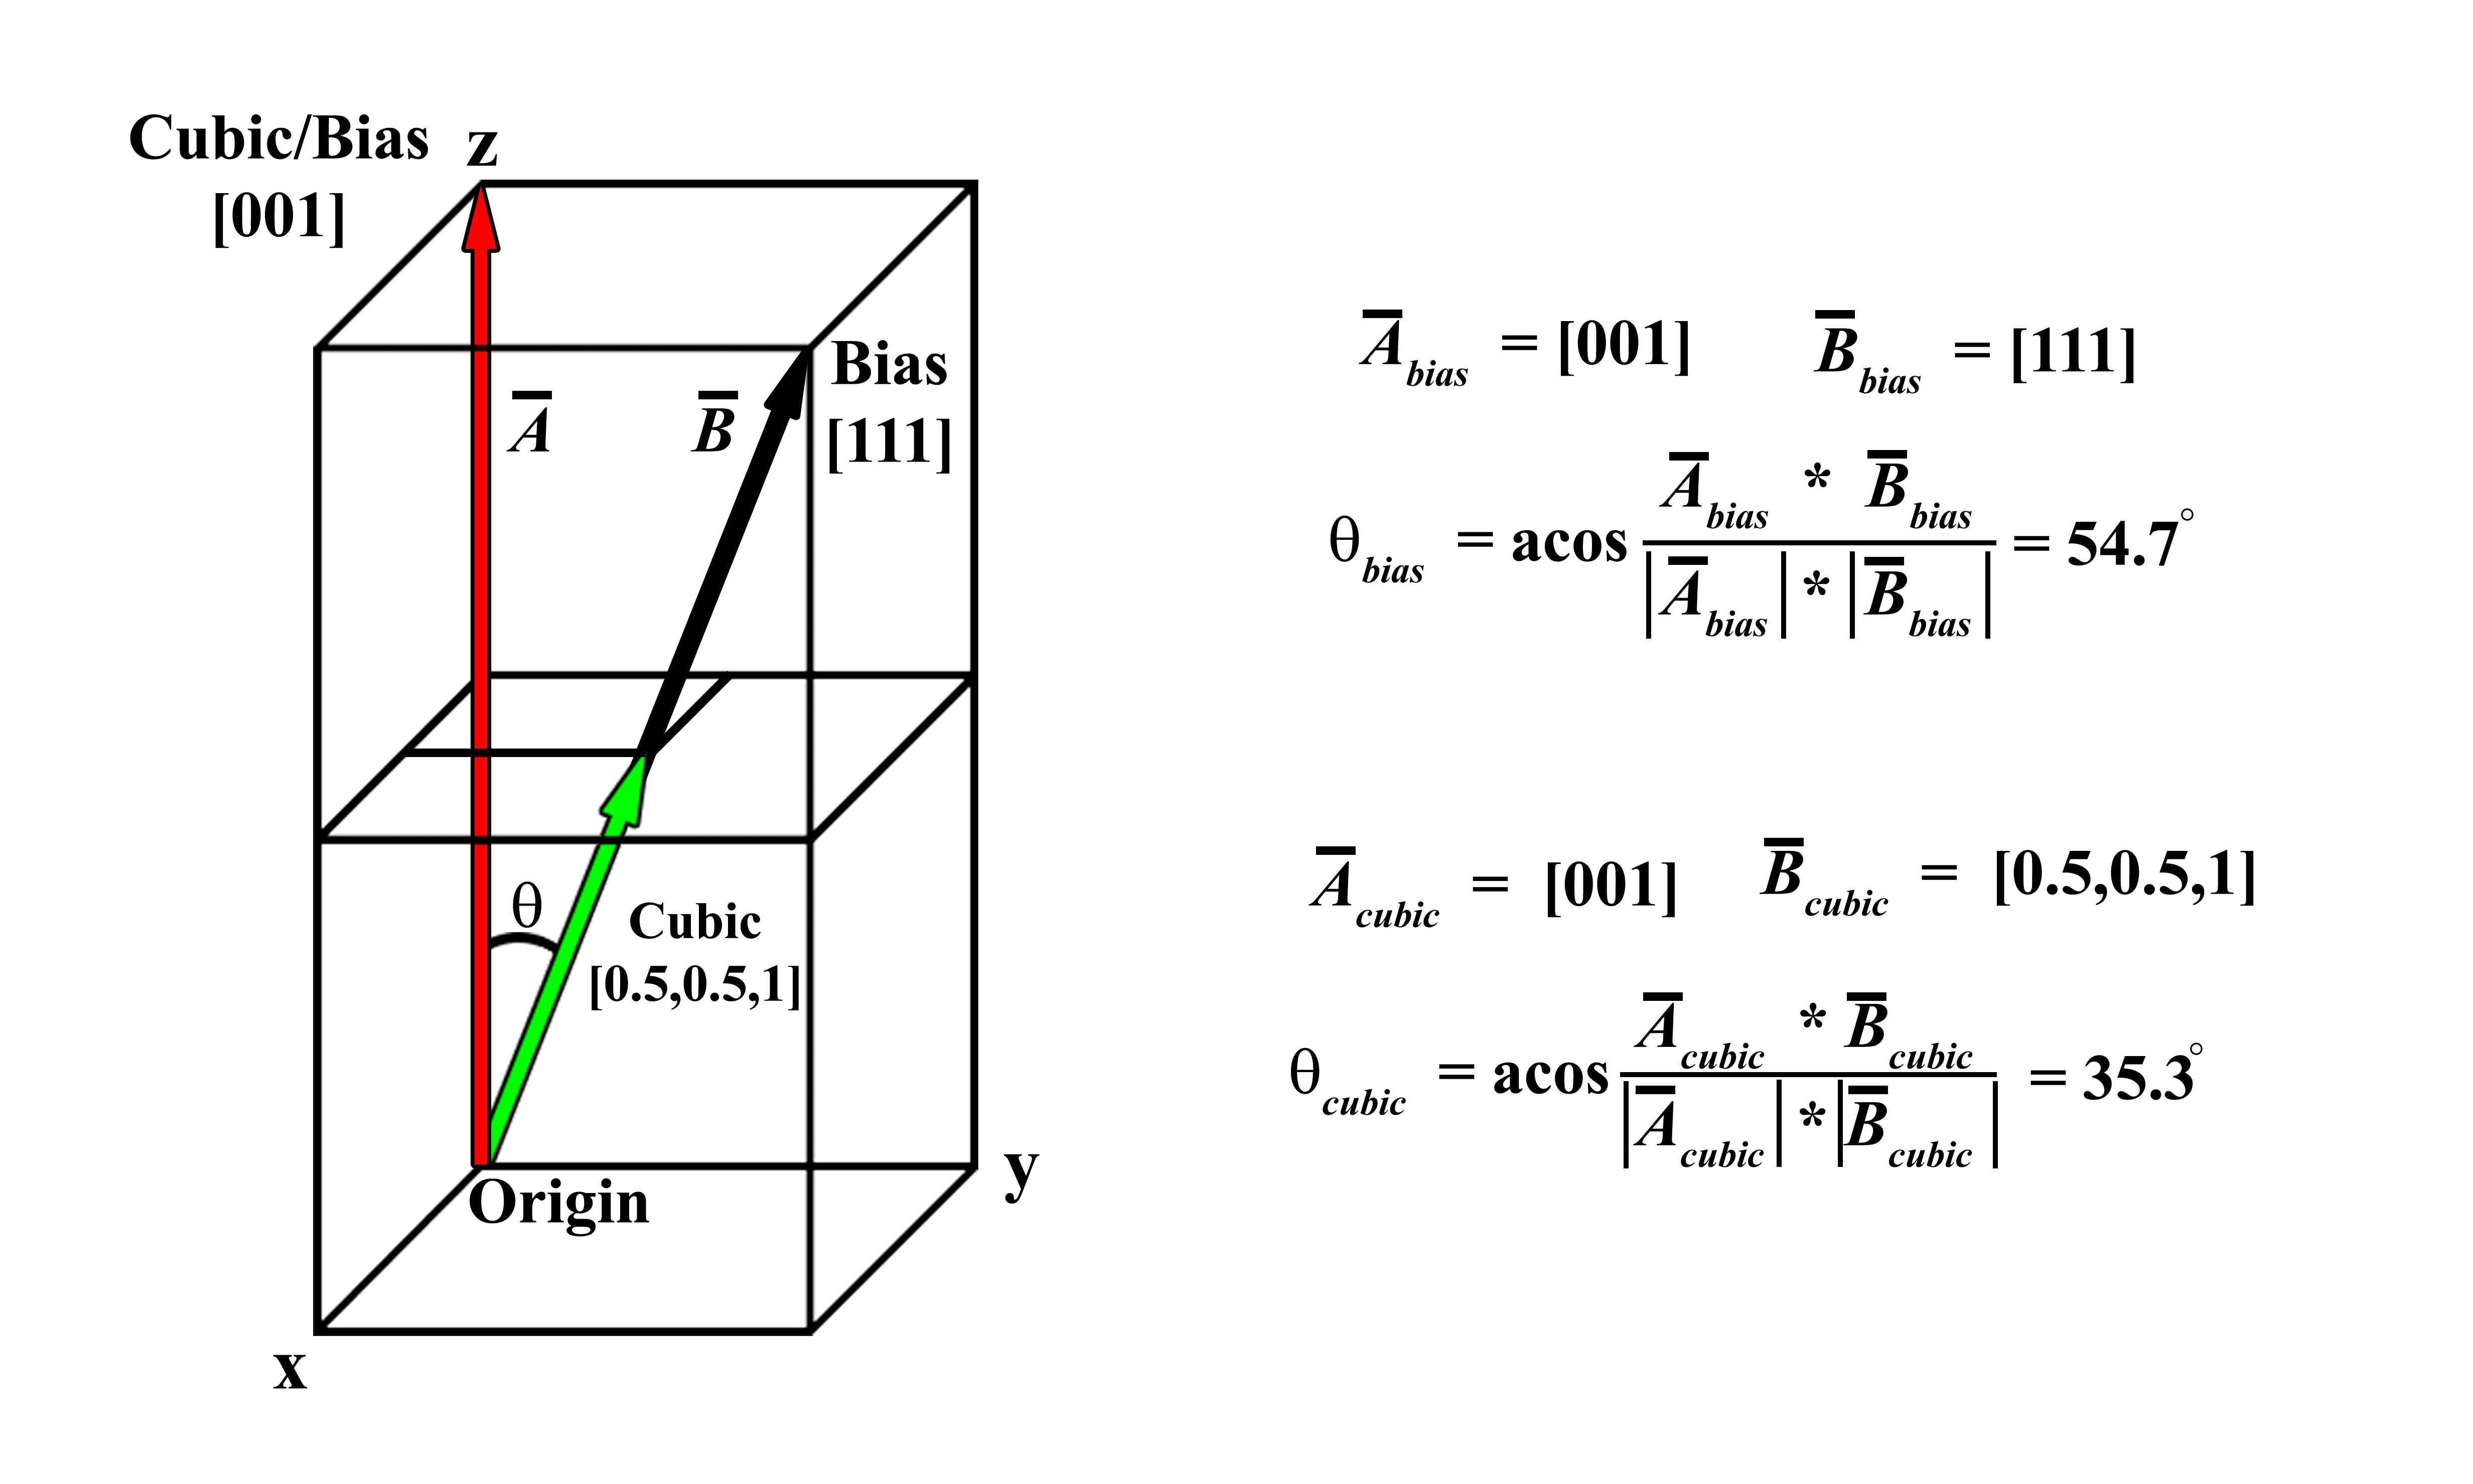 Schematic illustrating how a bias on one of the
axes (e.g., a tetragonal system) does not provide the correct angle
between vectors. The bias of the z-axis being doubled incorrectly
predicts the angle between the vectors. Note the positions are being
listed in parenthesis and do not denote crystallographic planes.